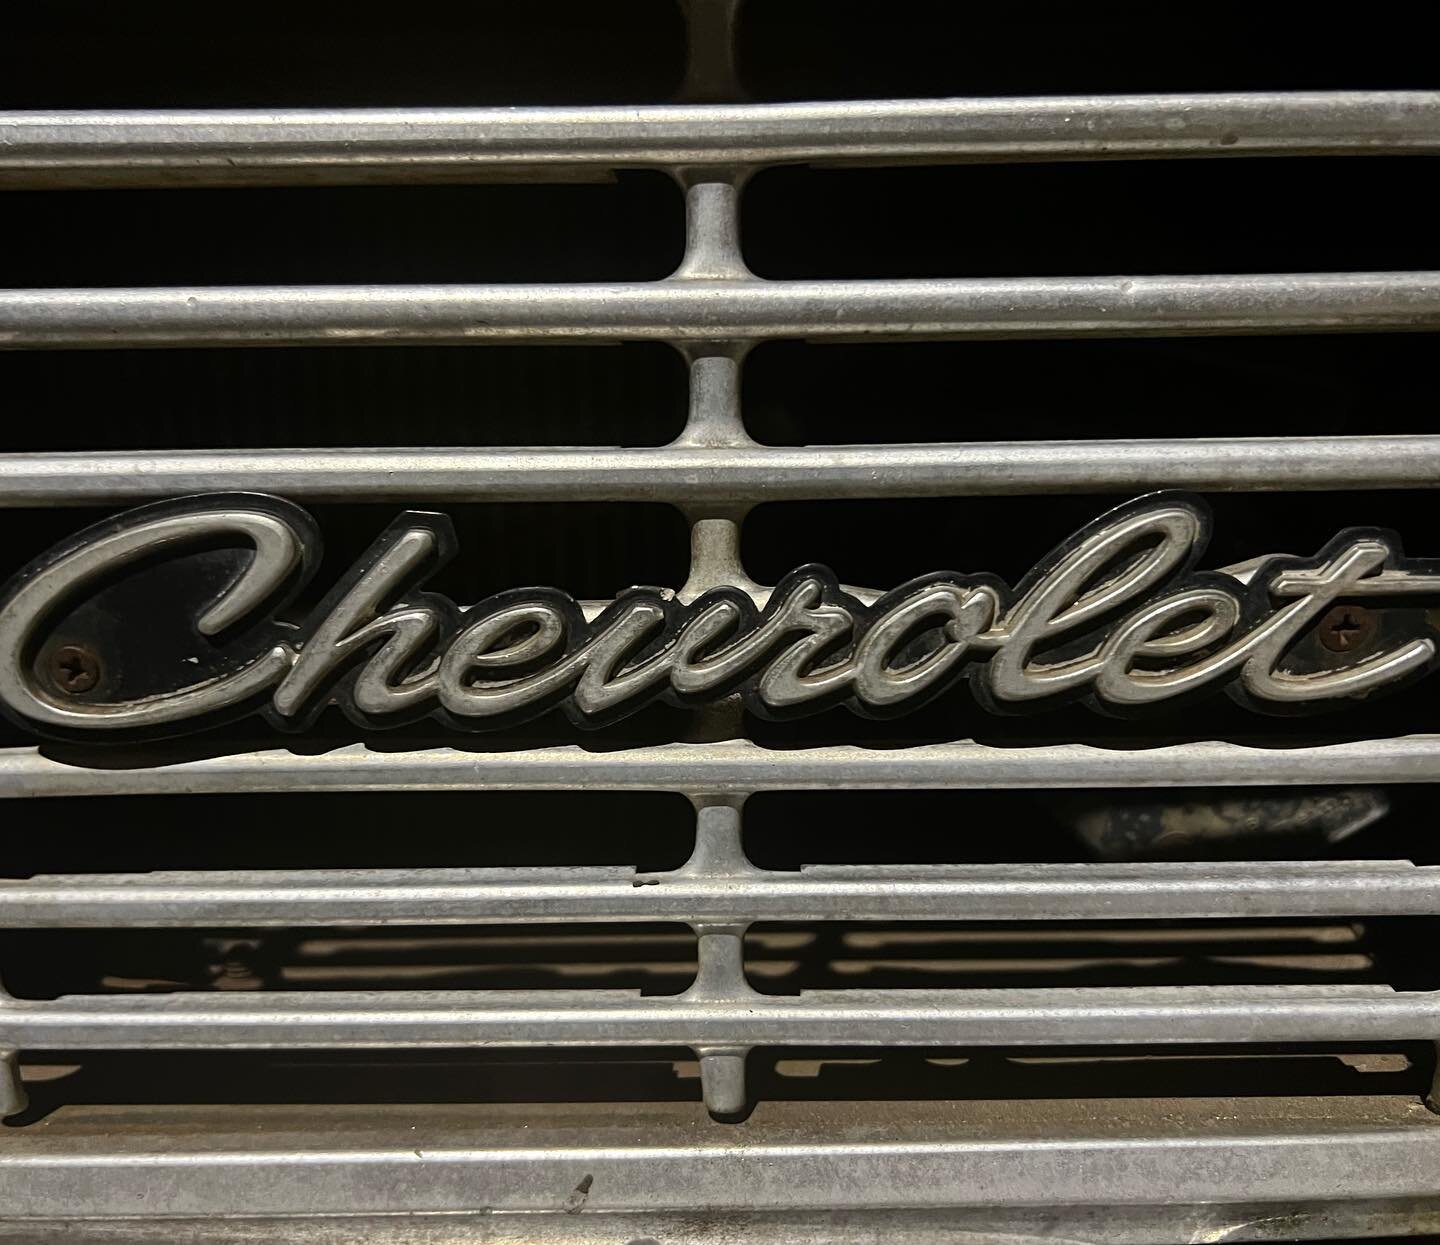 Chevy used to mean something... Just like the United States used to mean something. Its a brand that define a level of quality and style. Named for a Race car driver that helped found GM!